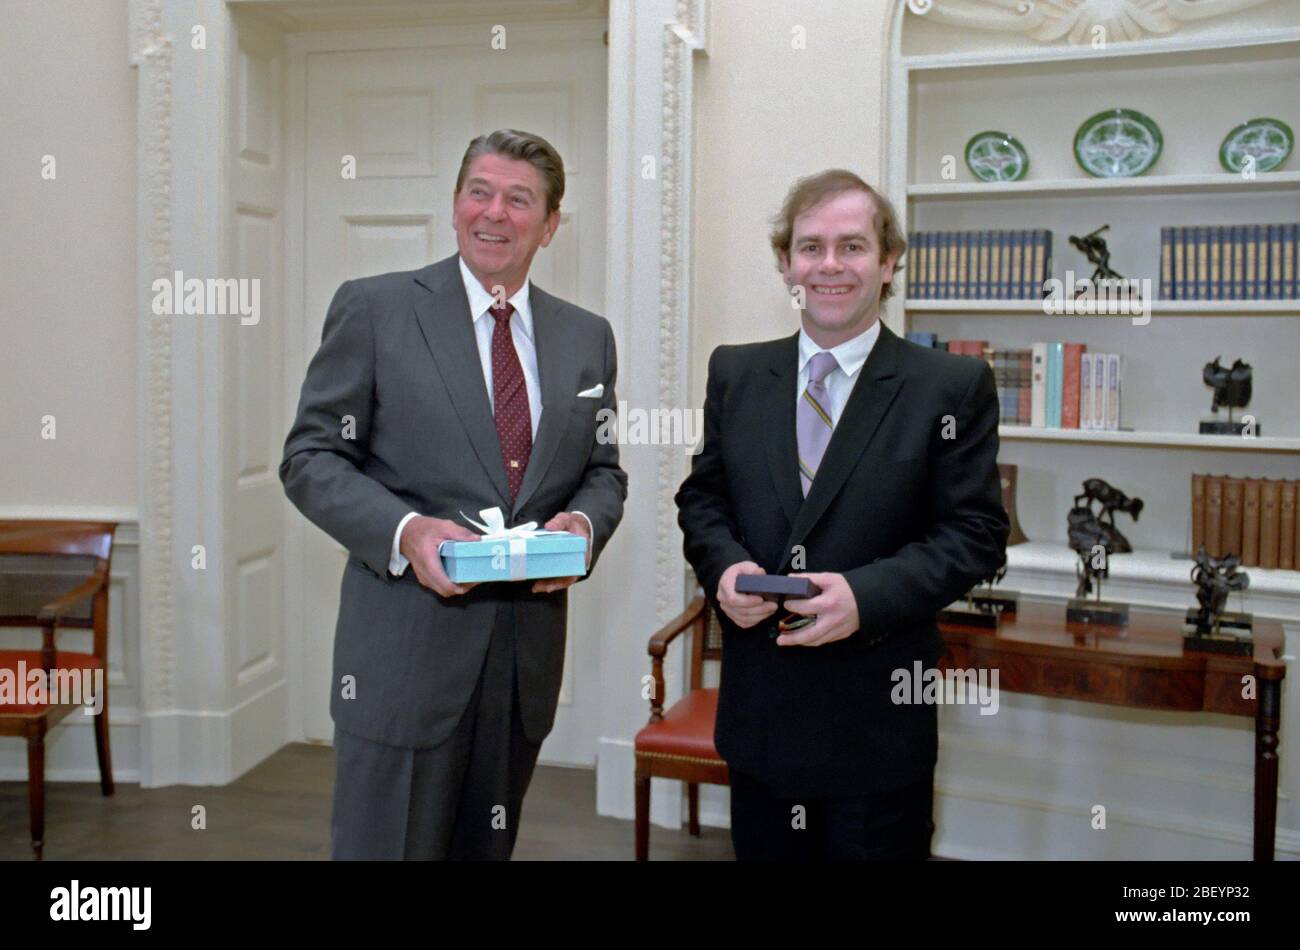 8/4/1982 President Reagan Photo Op. With Elton John in Oval Office Stock Photo